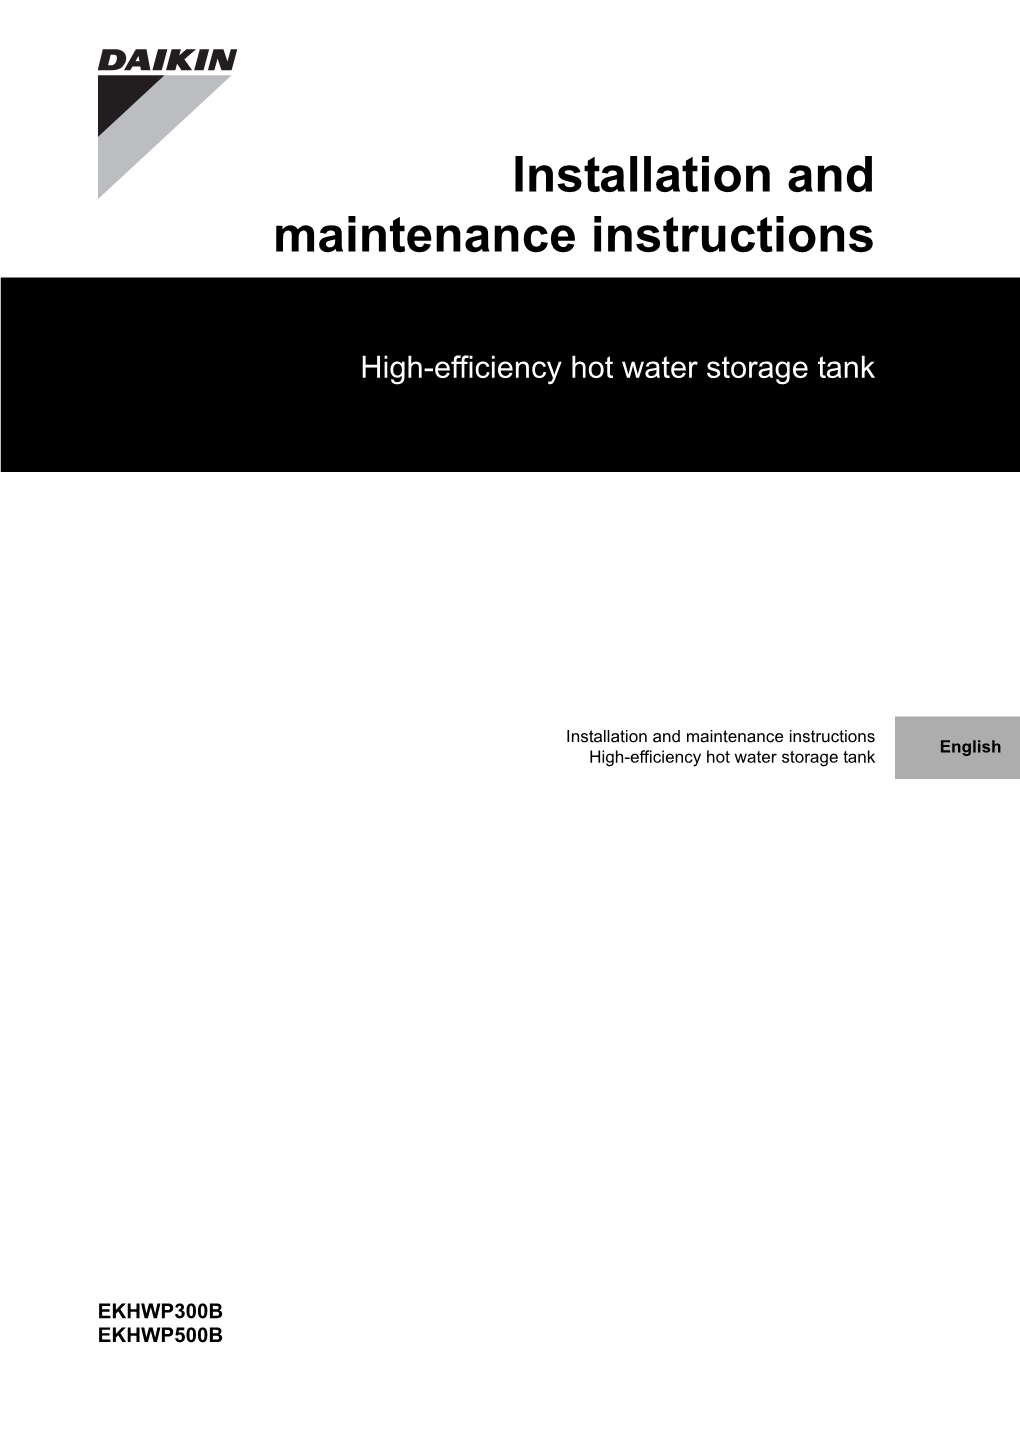 Installation and Maintenance Instructions